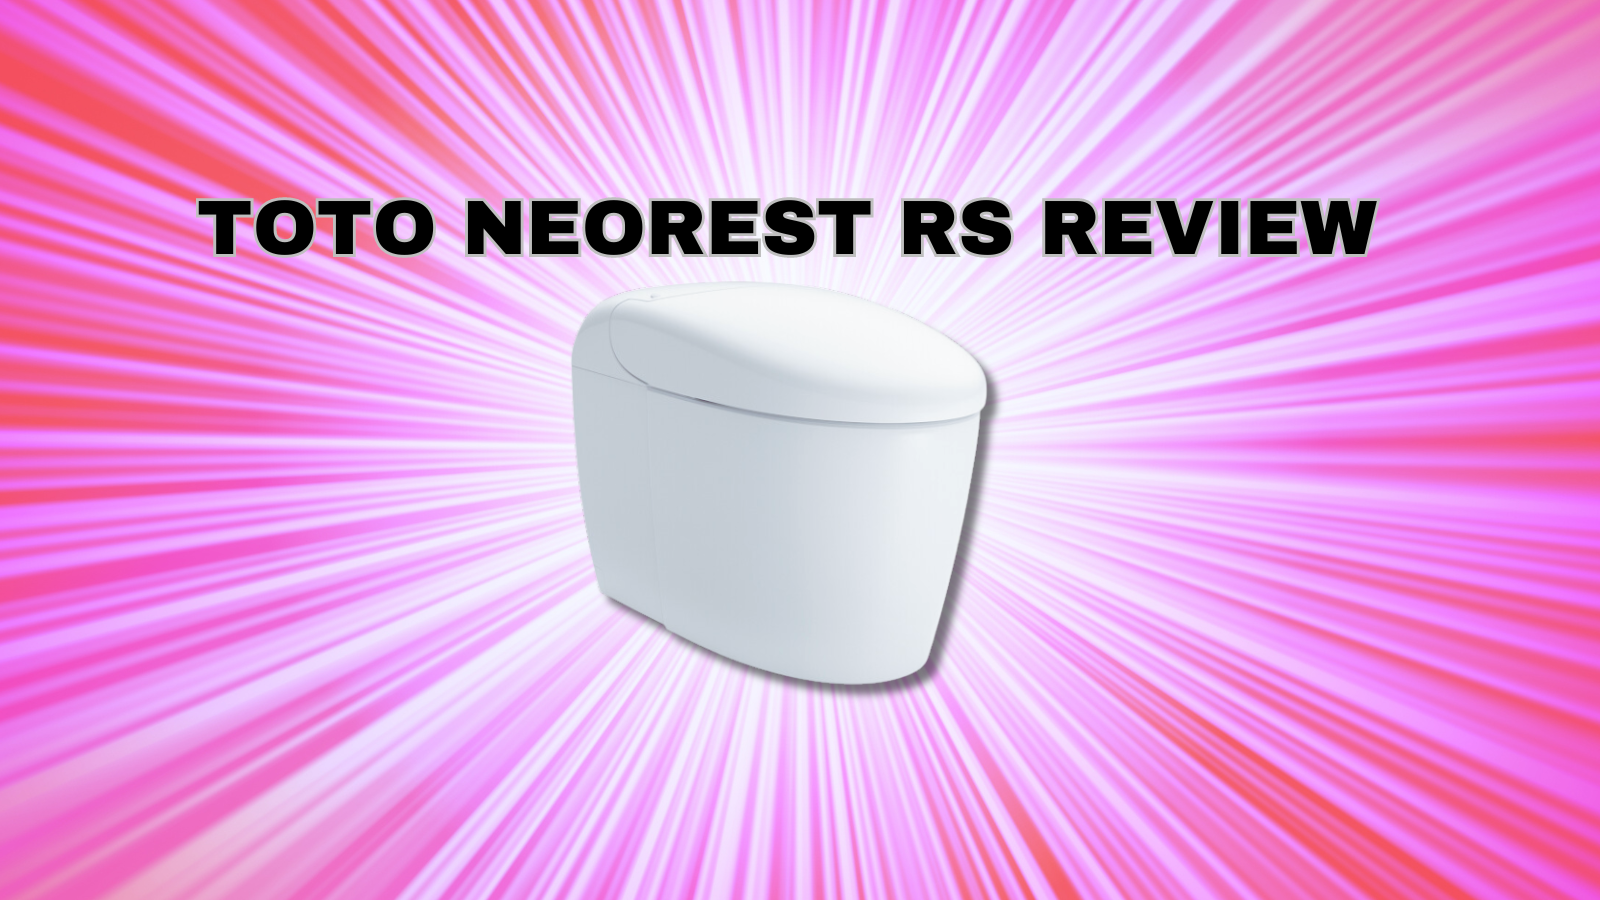 toto neorest rs review 